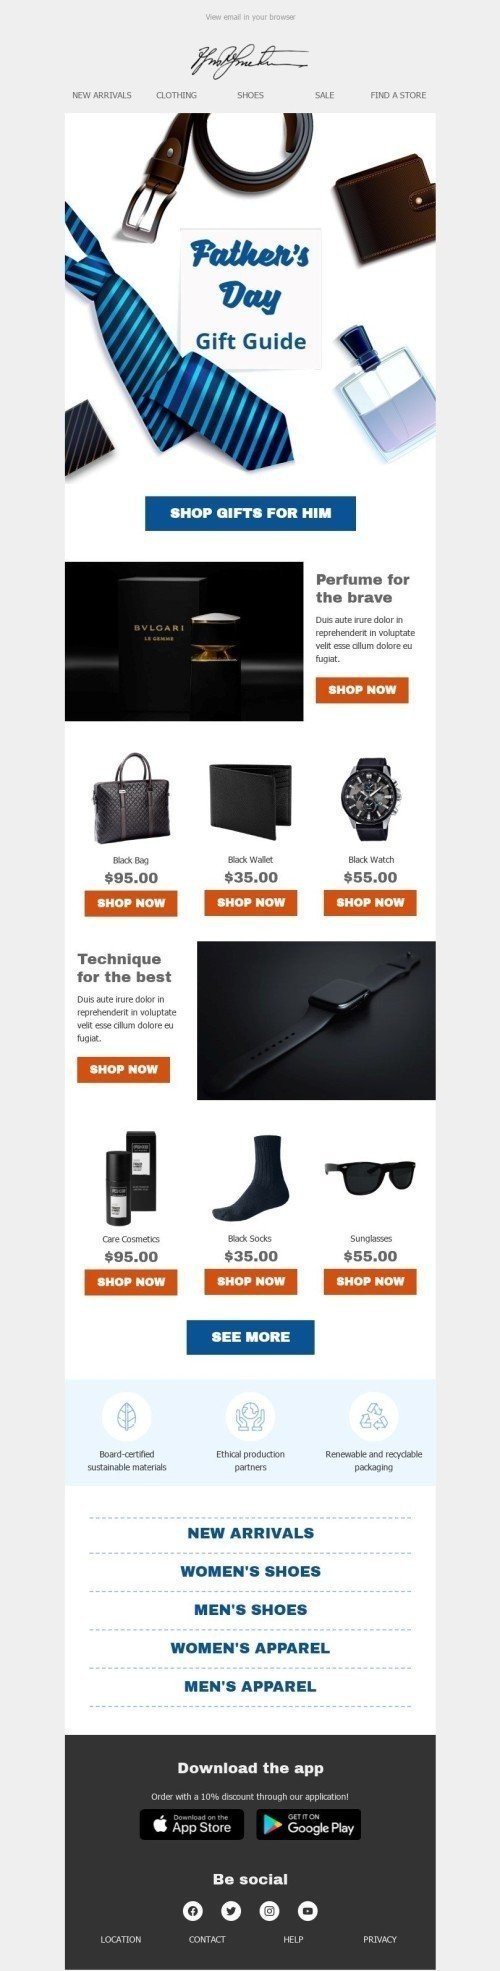 Father’s Day Email Template "Gift guide" for Fashion industry mobile view